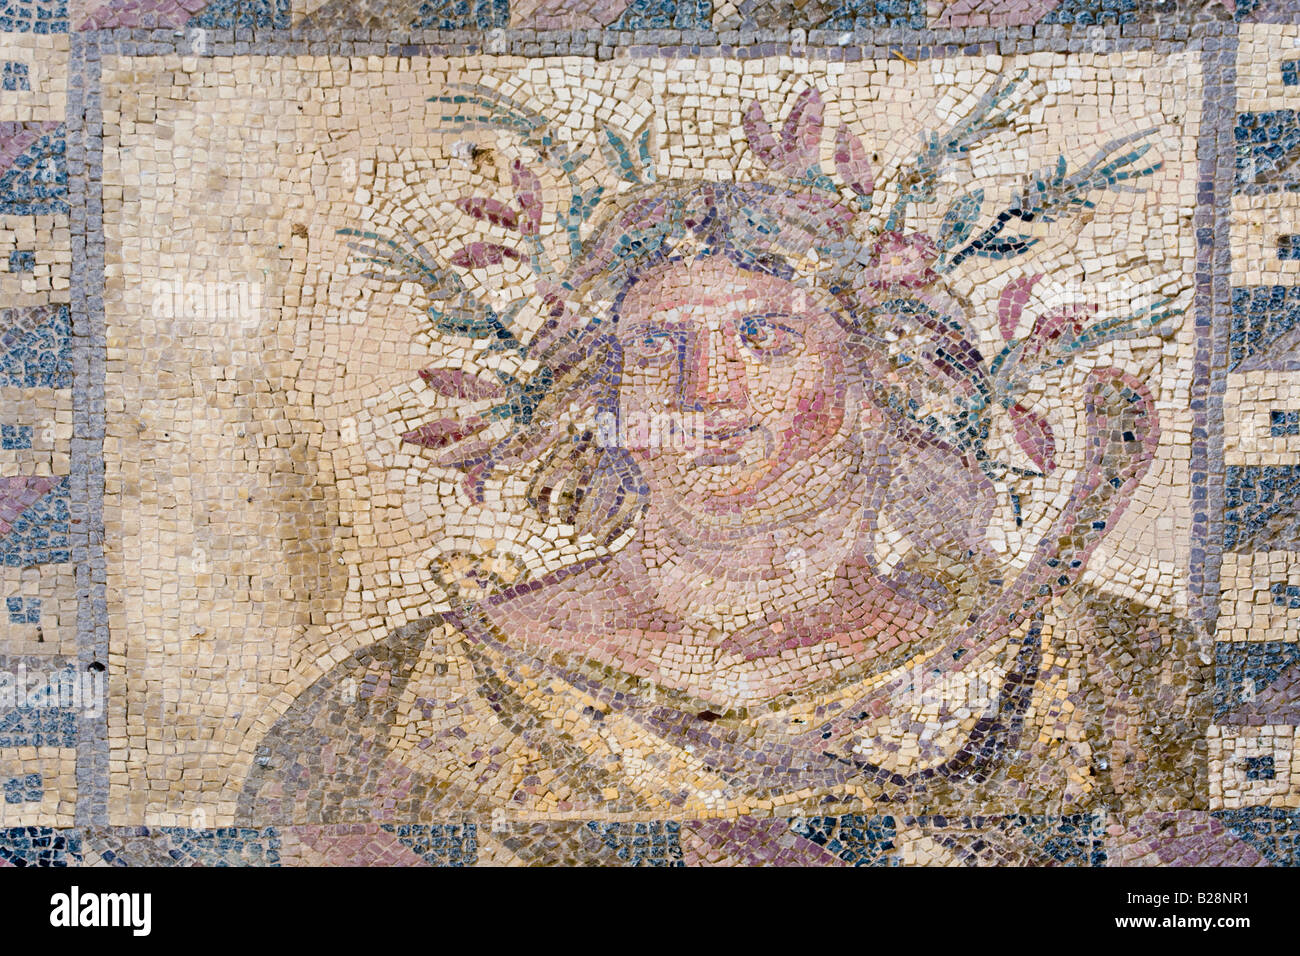 Mosaic of the bust of Autumn in the House of Dionysos, Pafos Mosaics, Nea Pafos, Cyprus Stock Photo